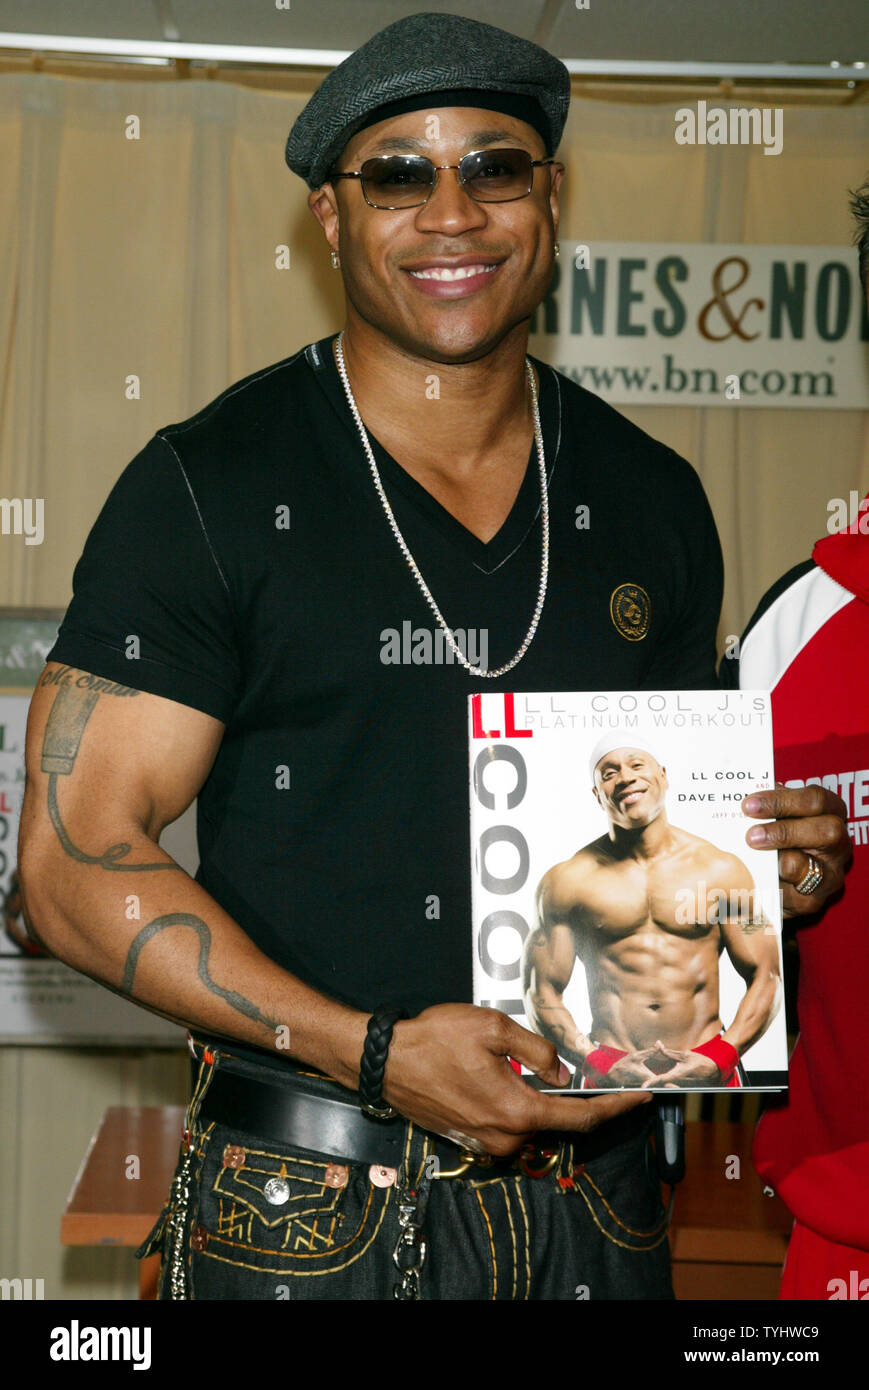 LL Cool J poses for pictures before signing copies of his new book 